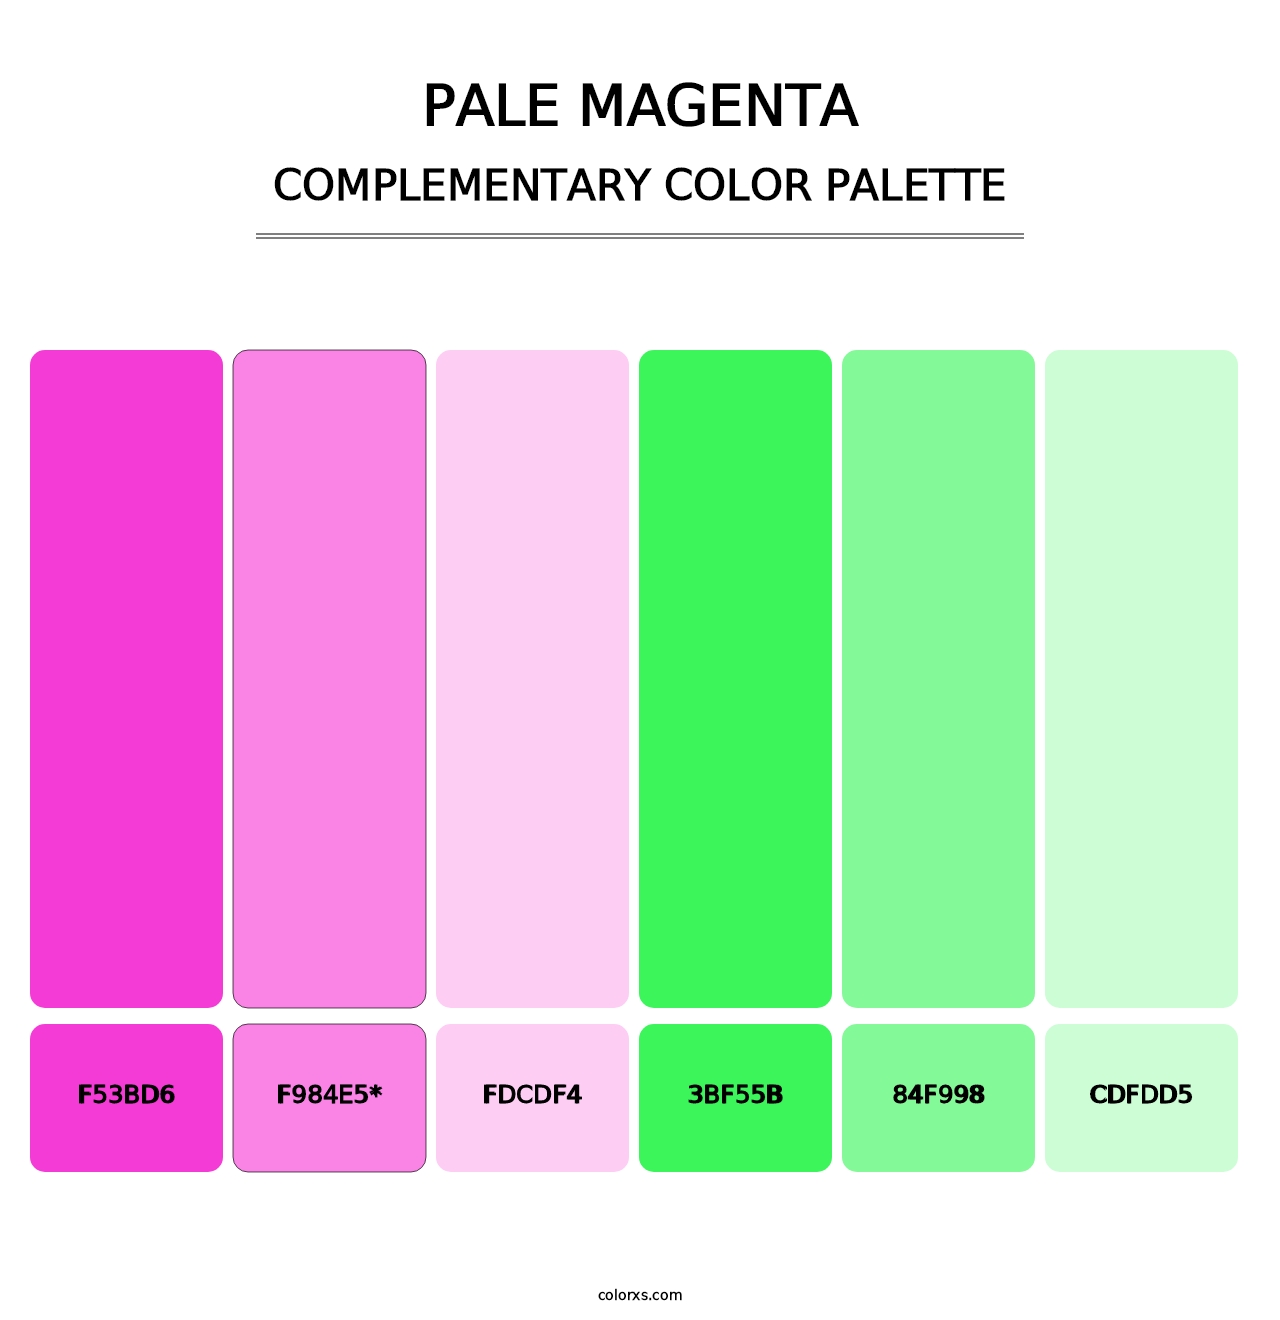 Pale Magenta - Complementary Color Palette